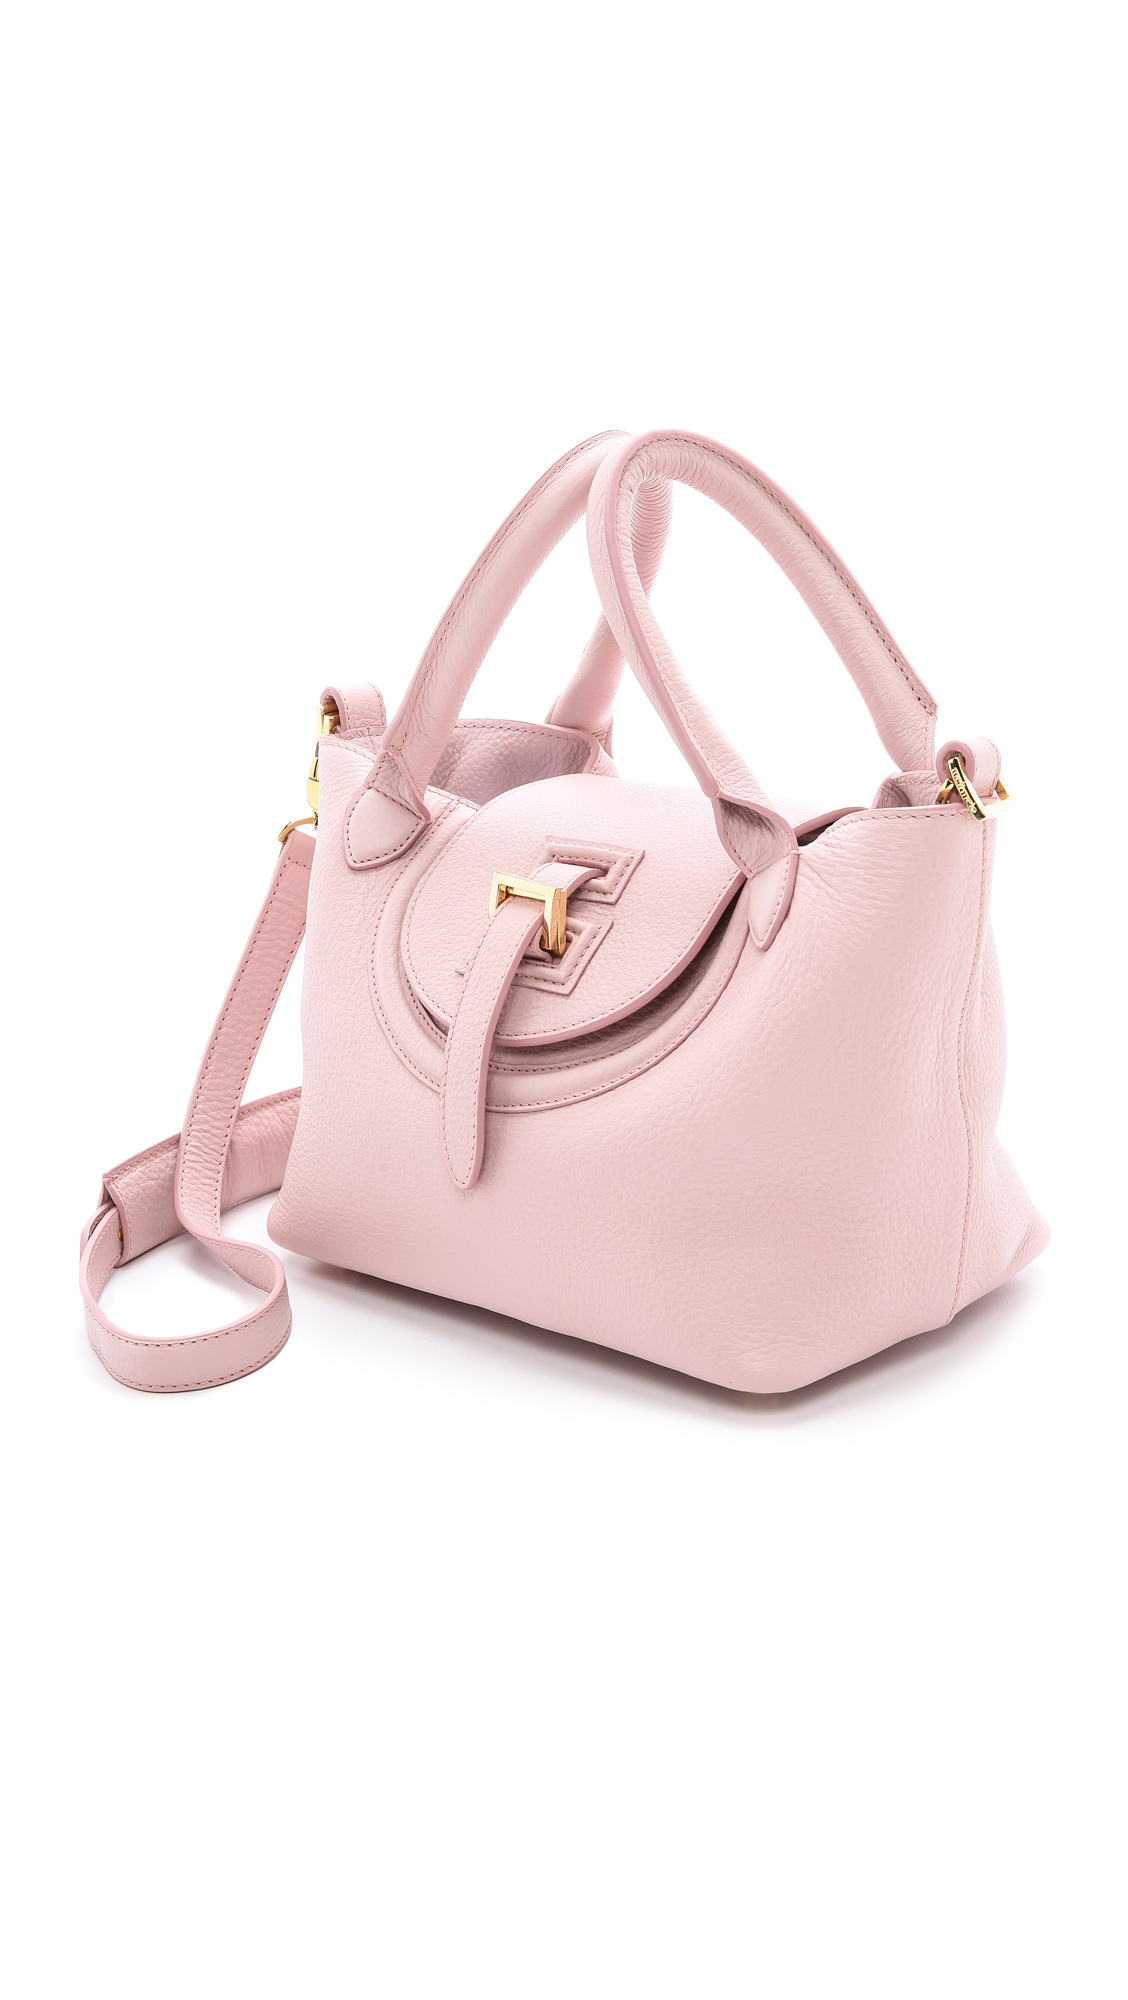 Lyst - Meli Melo Mini Thela Halo Bag Dusty Pink in Pink